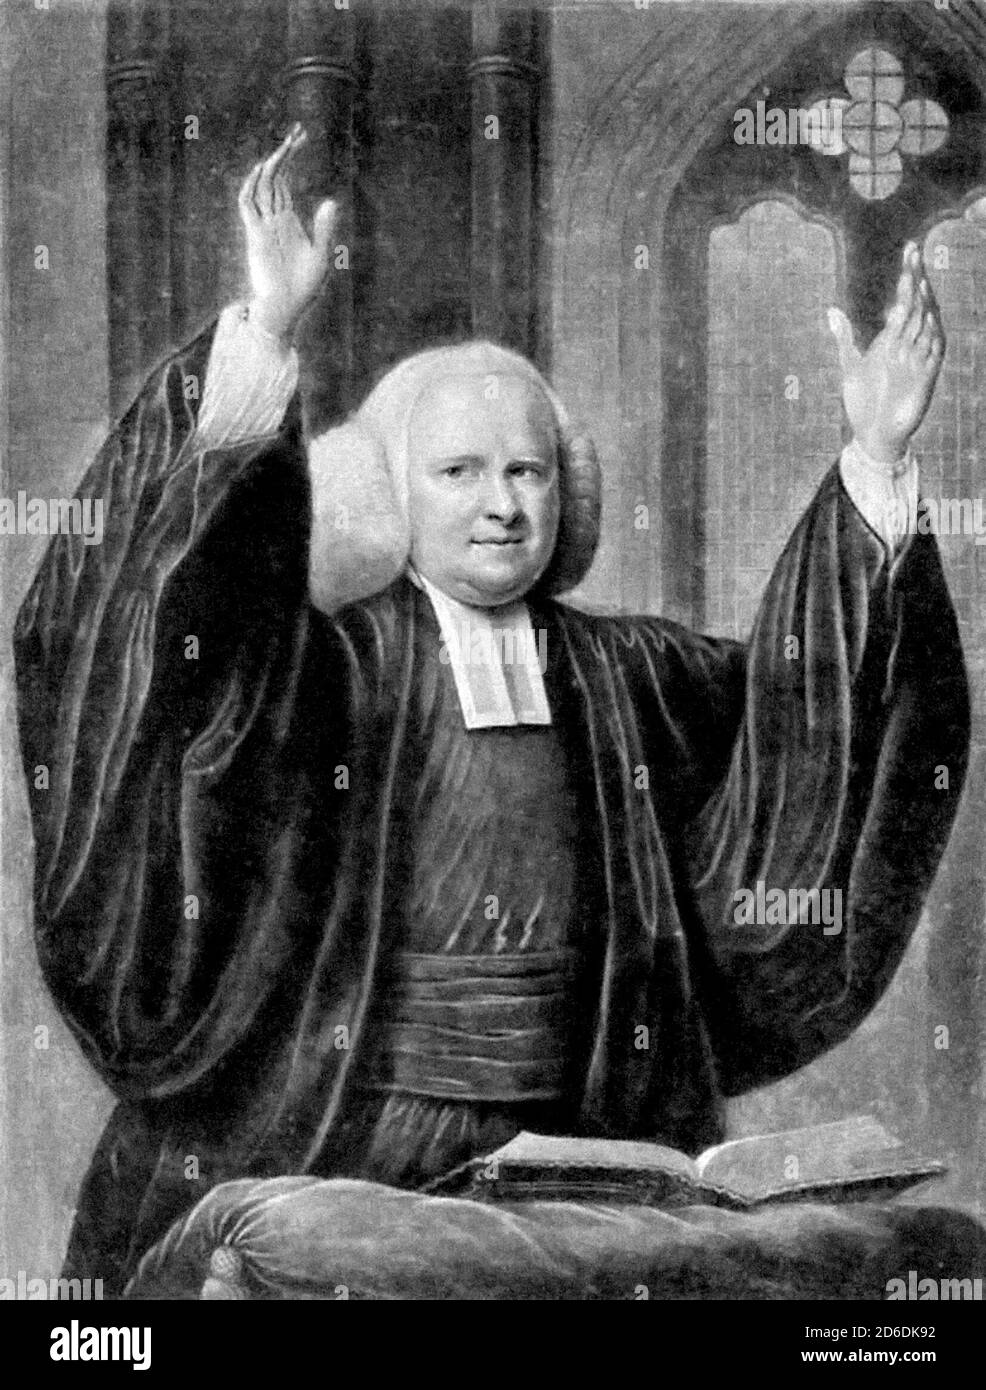 George Whitefield. Portrait of the English Anglican cleric, Reverend George Whitefield (1714-1770), mezzotint by John Greenwood, 1769. Whitefield was one of the founders of Methodism and the evangelical movement. Stock Photo